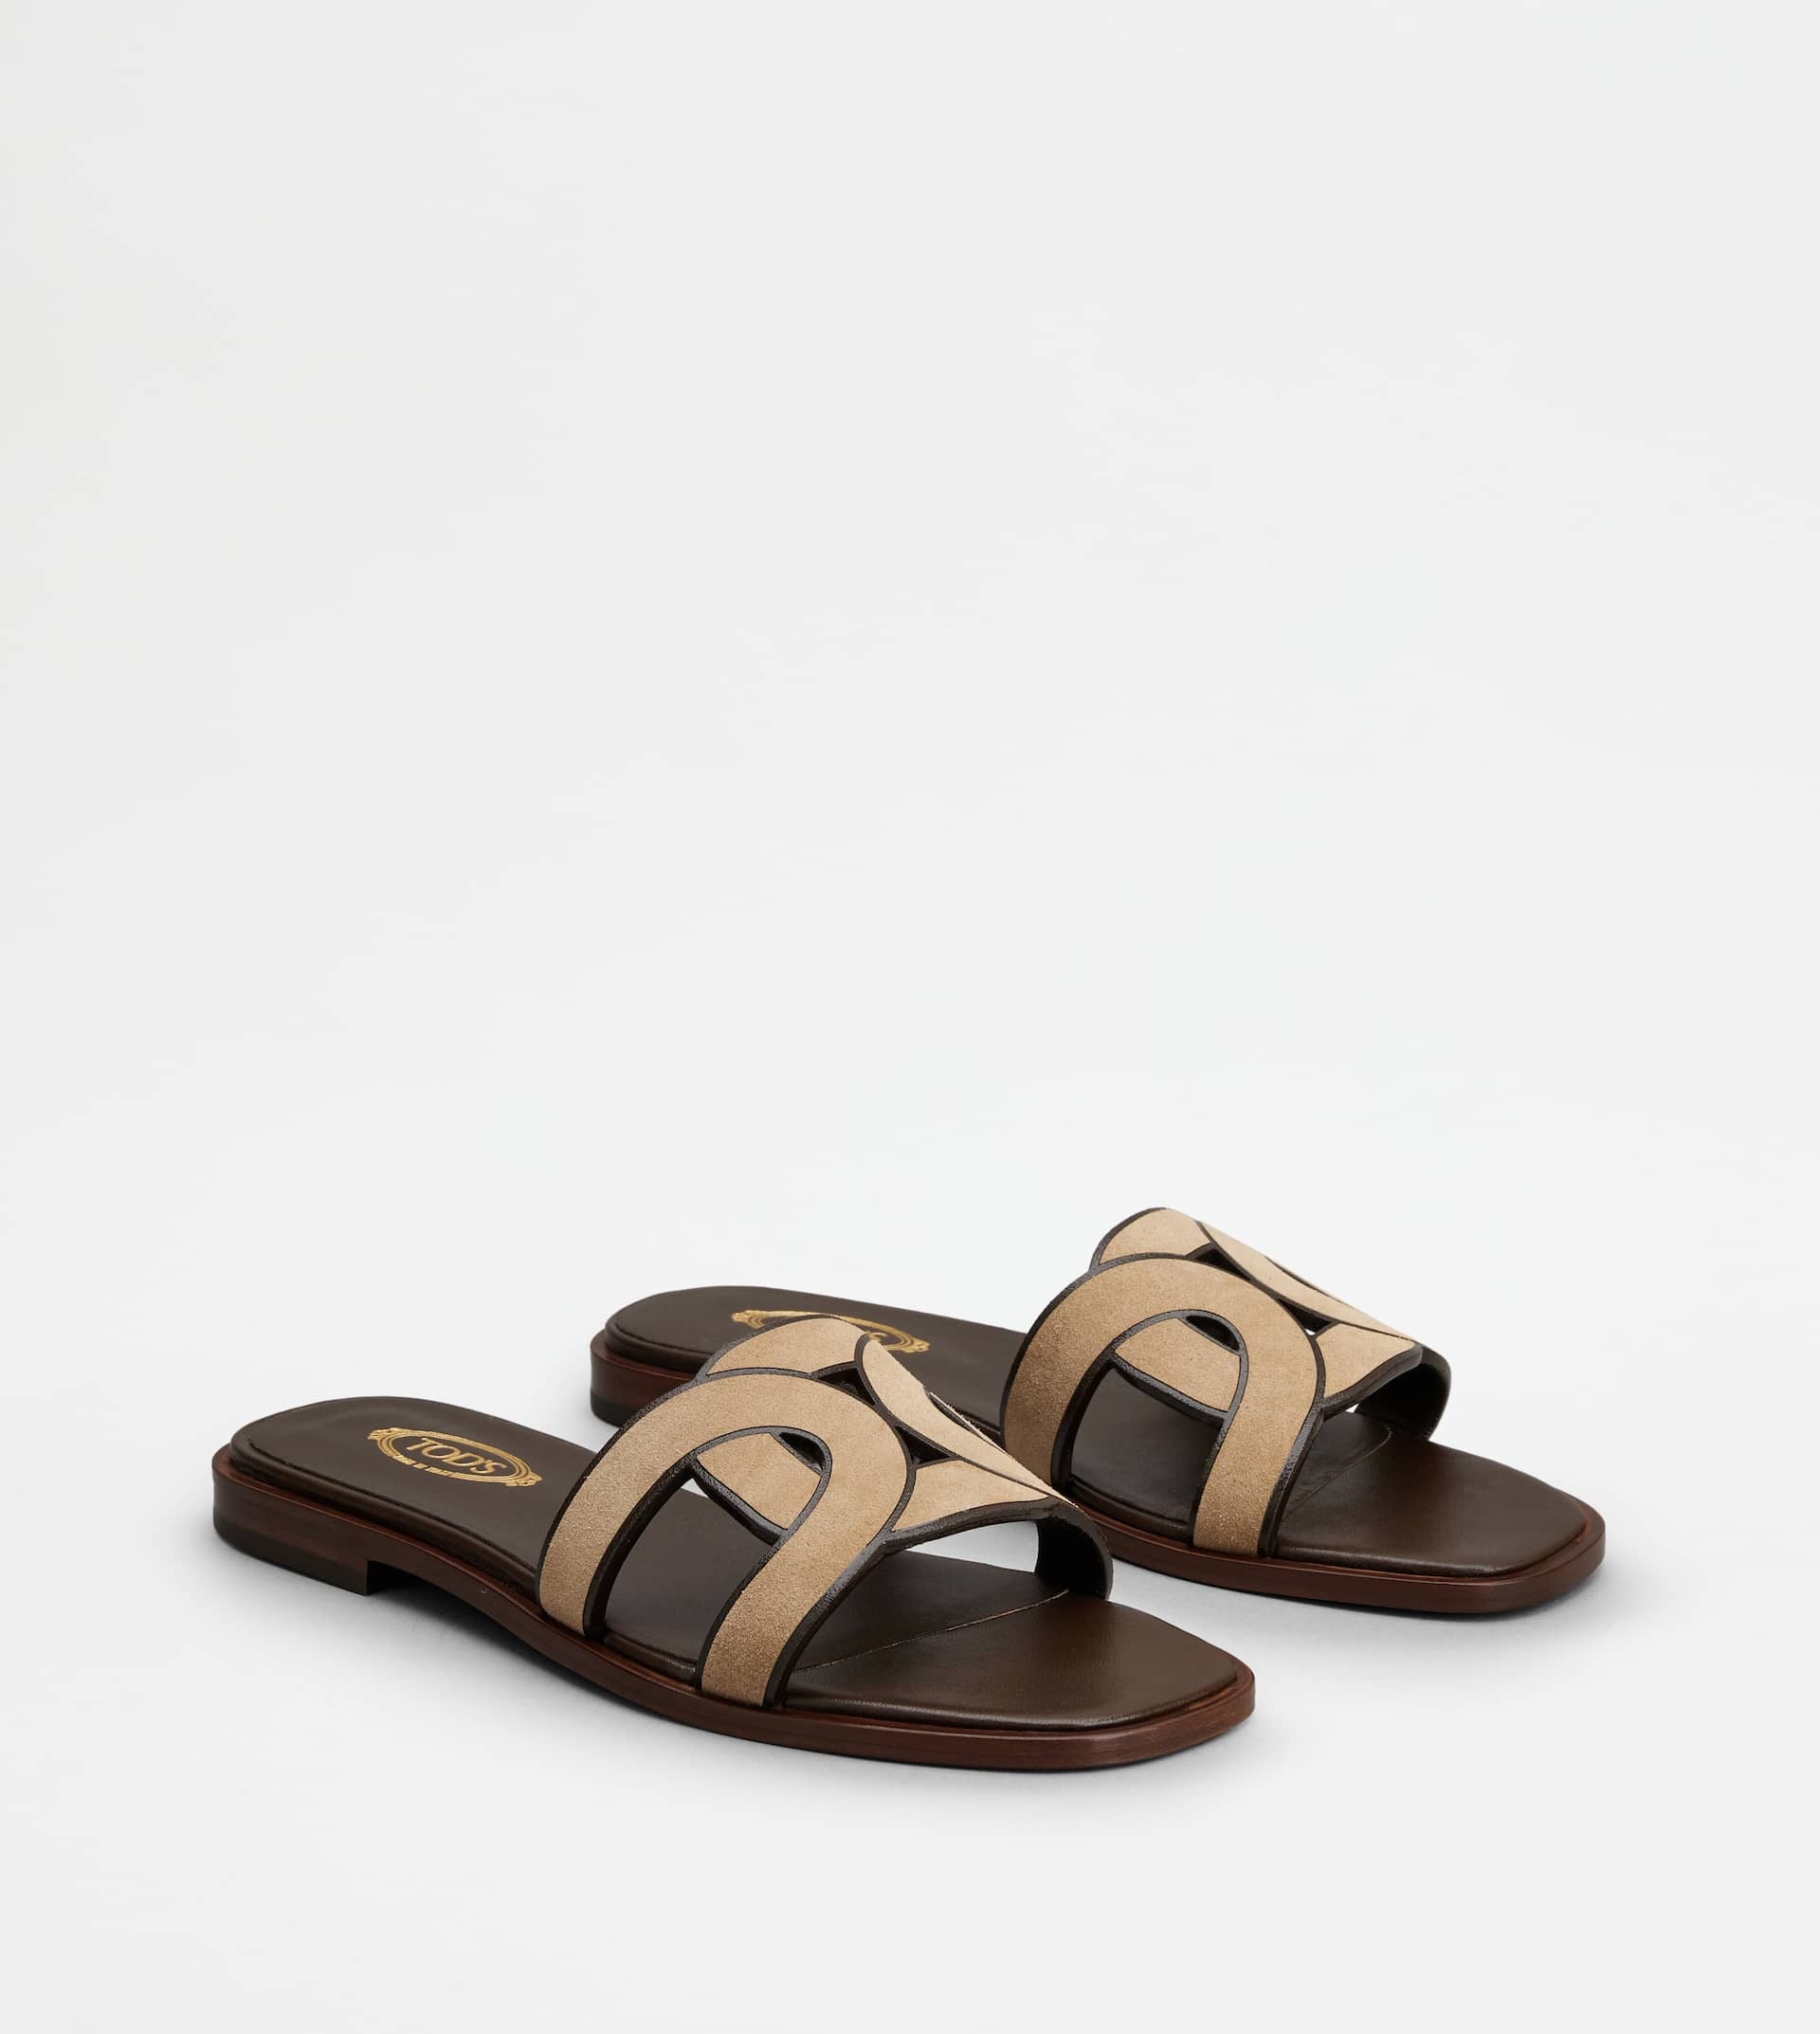 SANDALS IN SUEDE - BROWN - 3